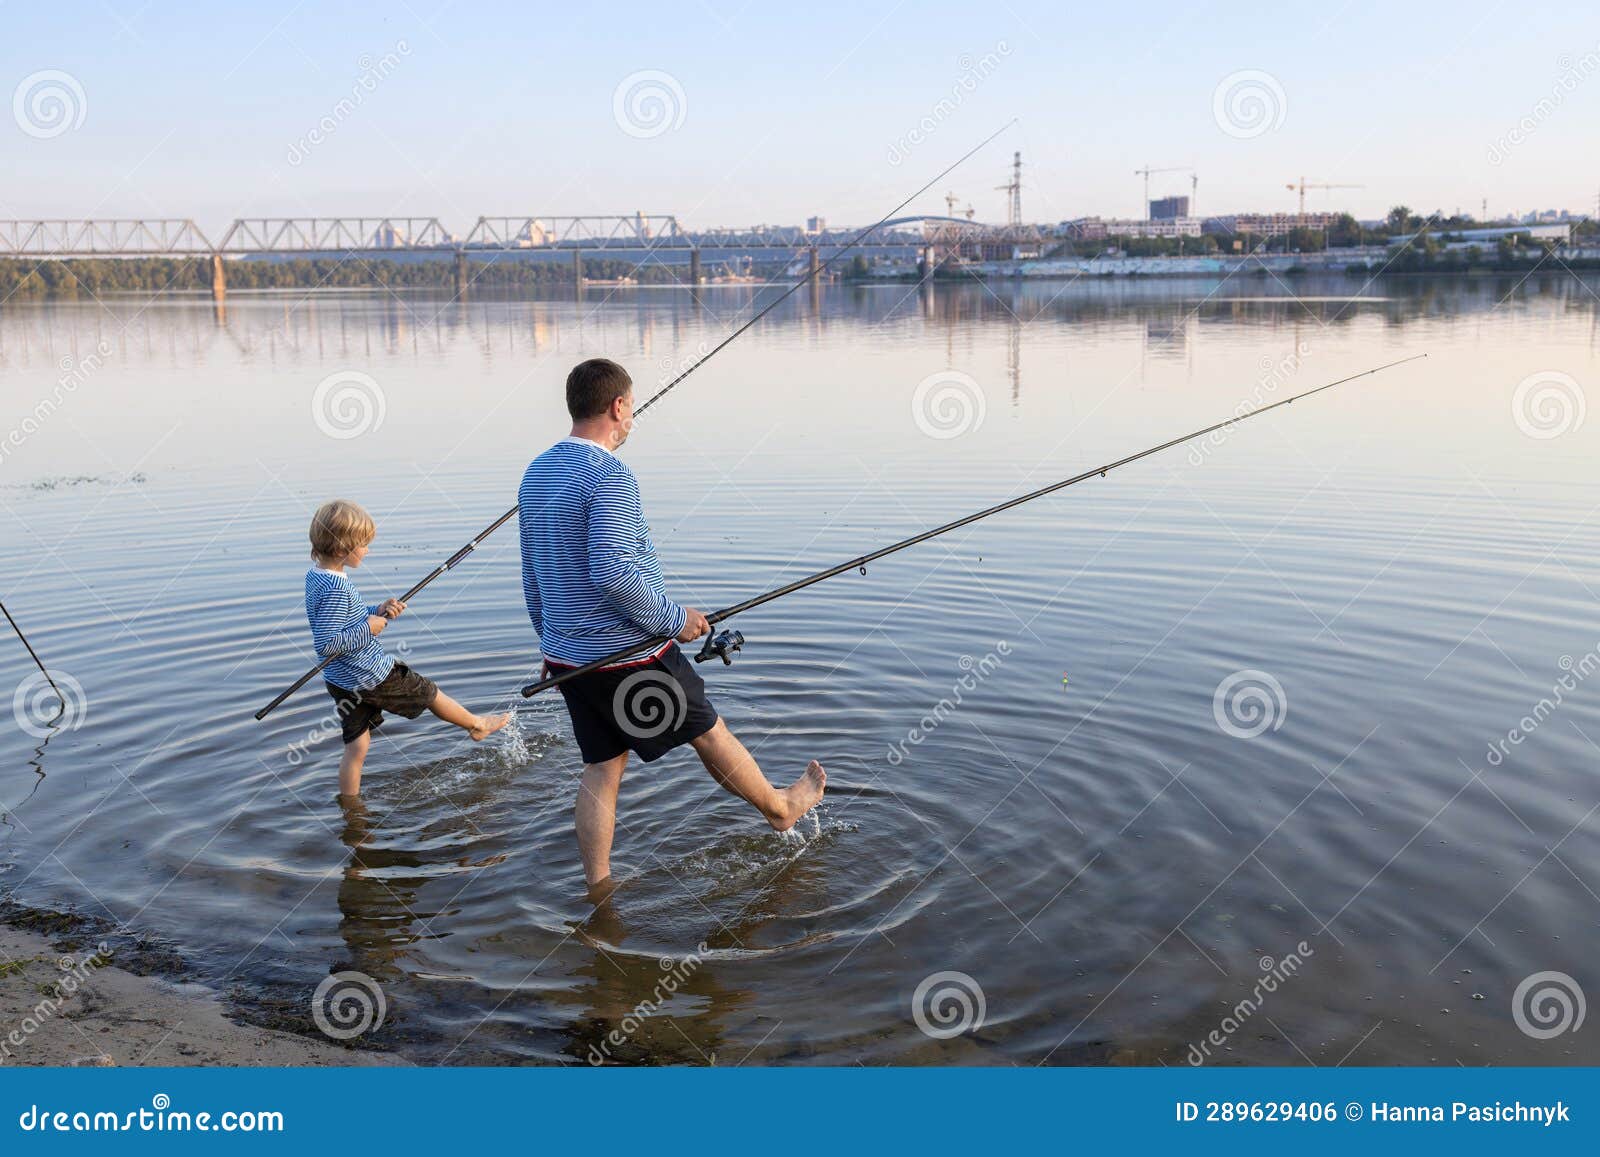 https://thumbs.dreamstime.com/z/dad-son-go-fishing-together-stand-water-rods-merrily-splash-their-feet-father-s-day-concept-family-interesting-289629406.jpg